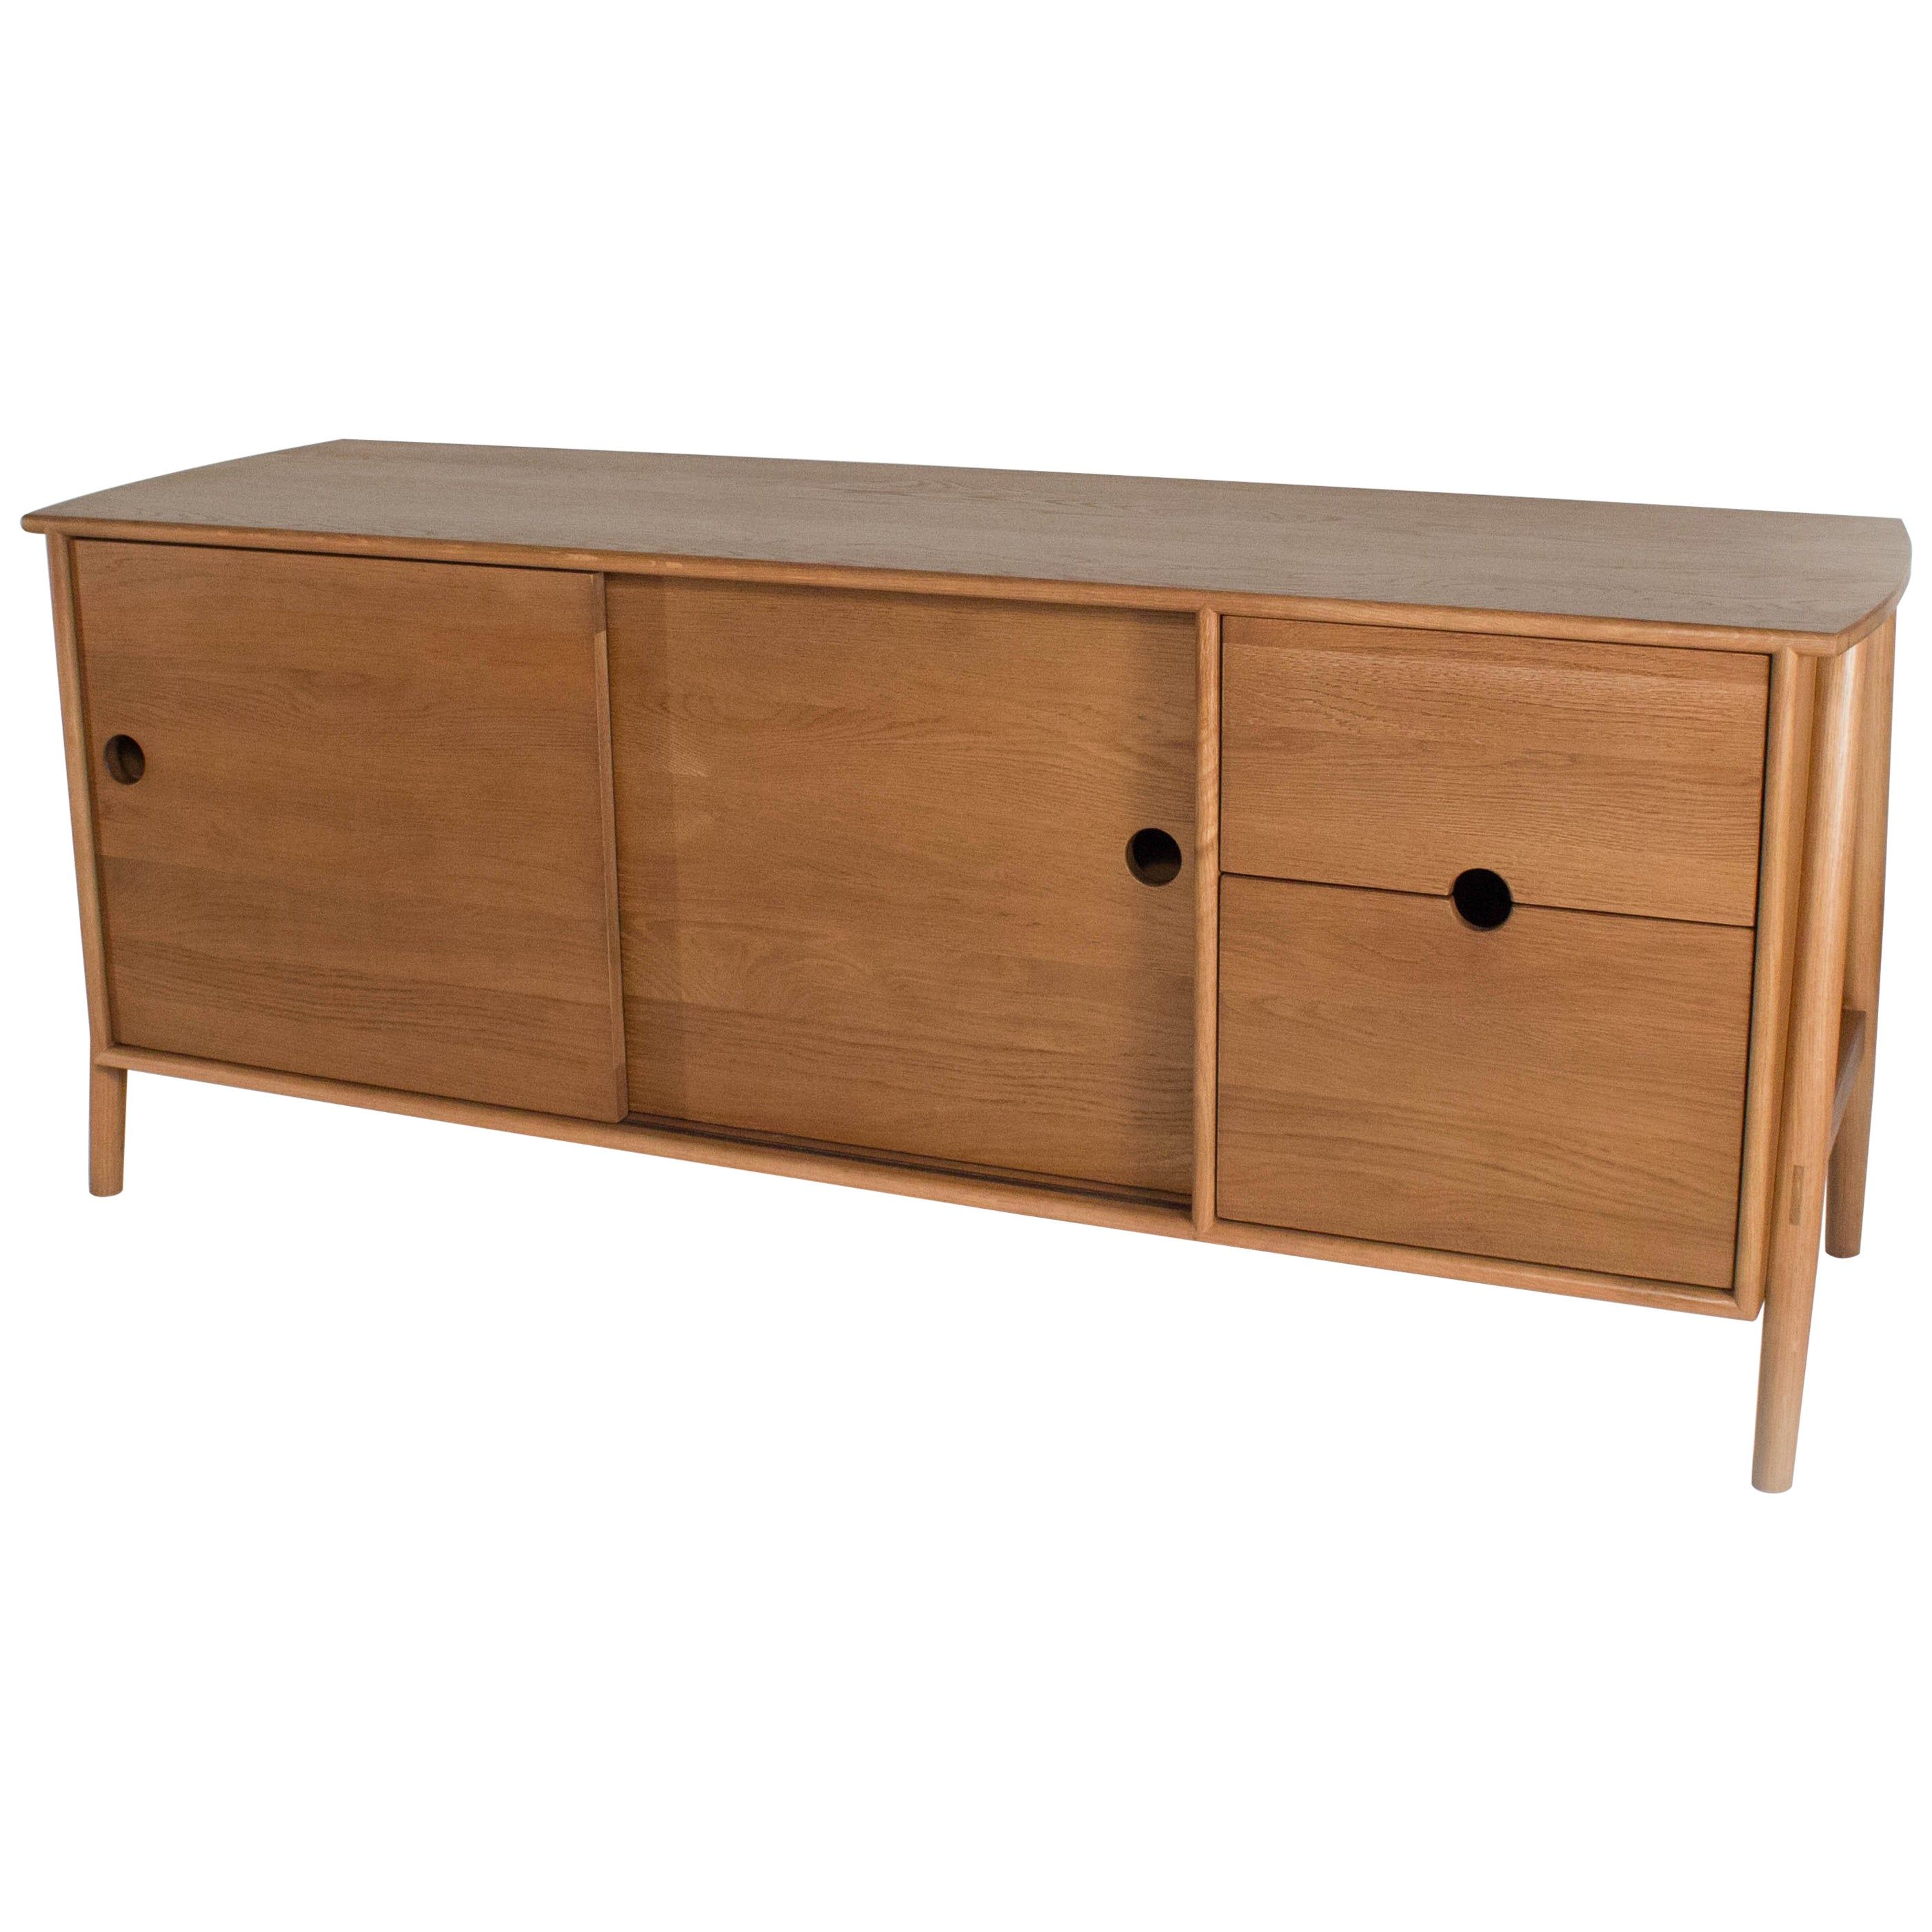 Woodbine Sideboard, Sienna, Midcentury Sideboard In Wood With Most Up To Date Sienna Sideboards (View 15 of 20)